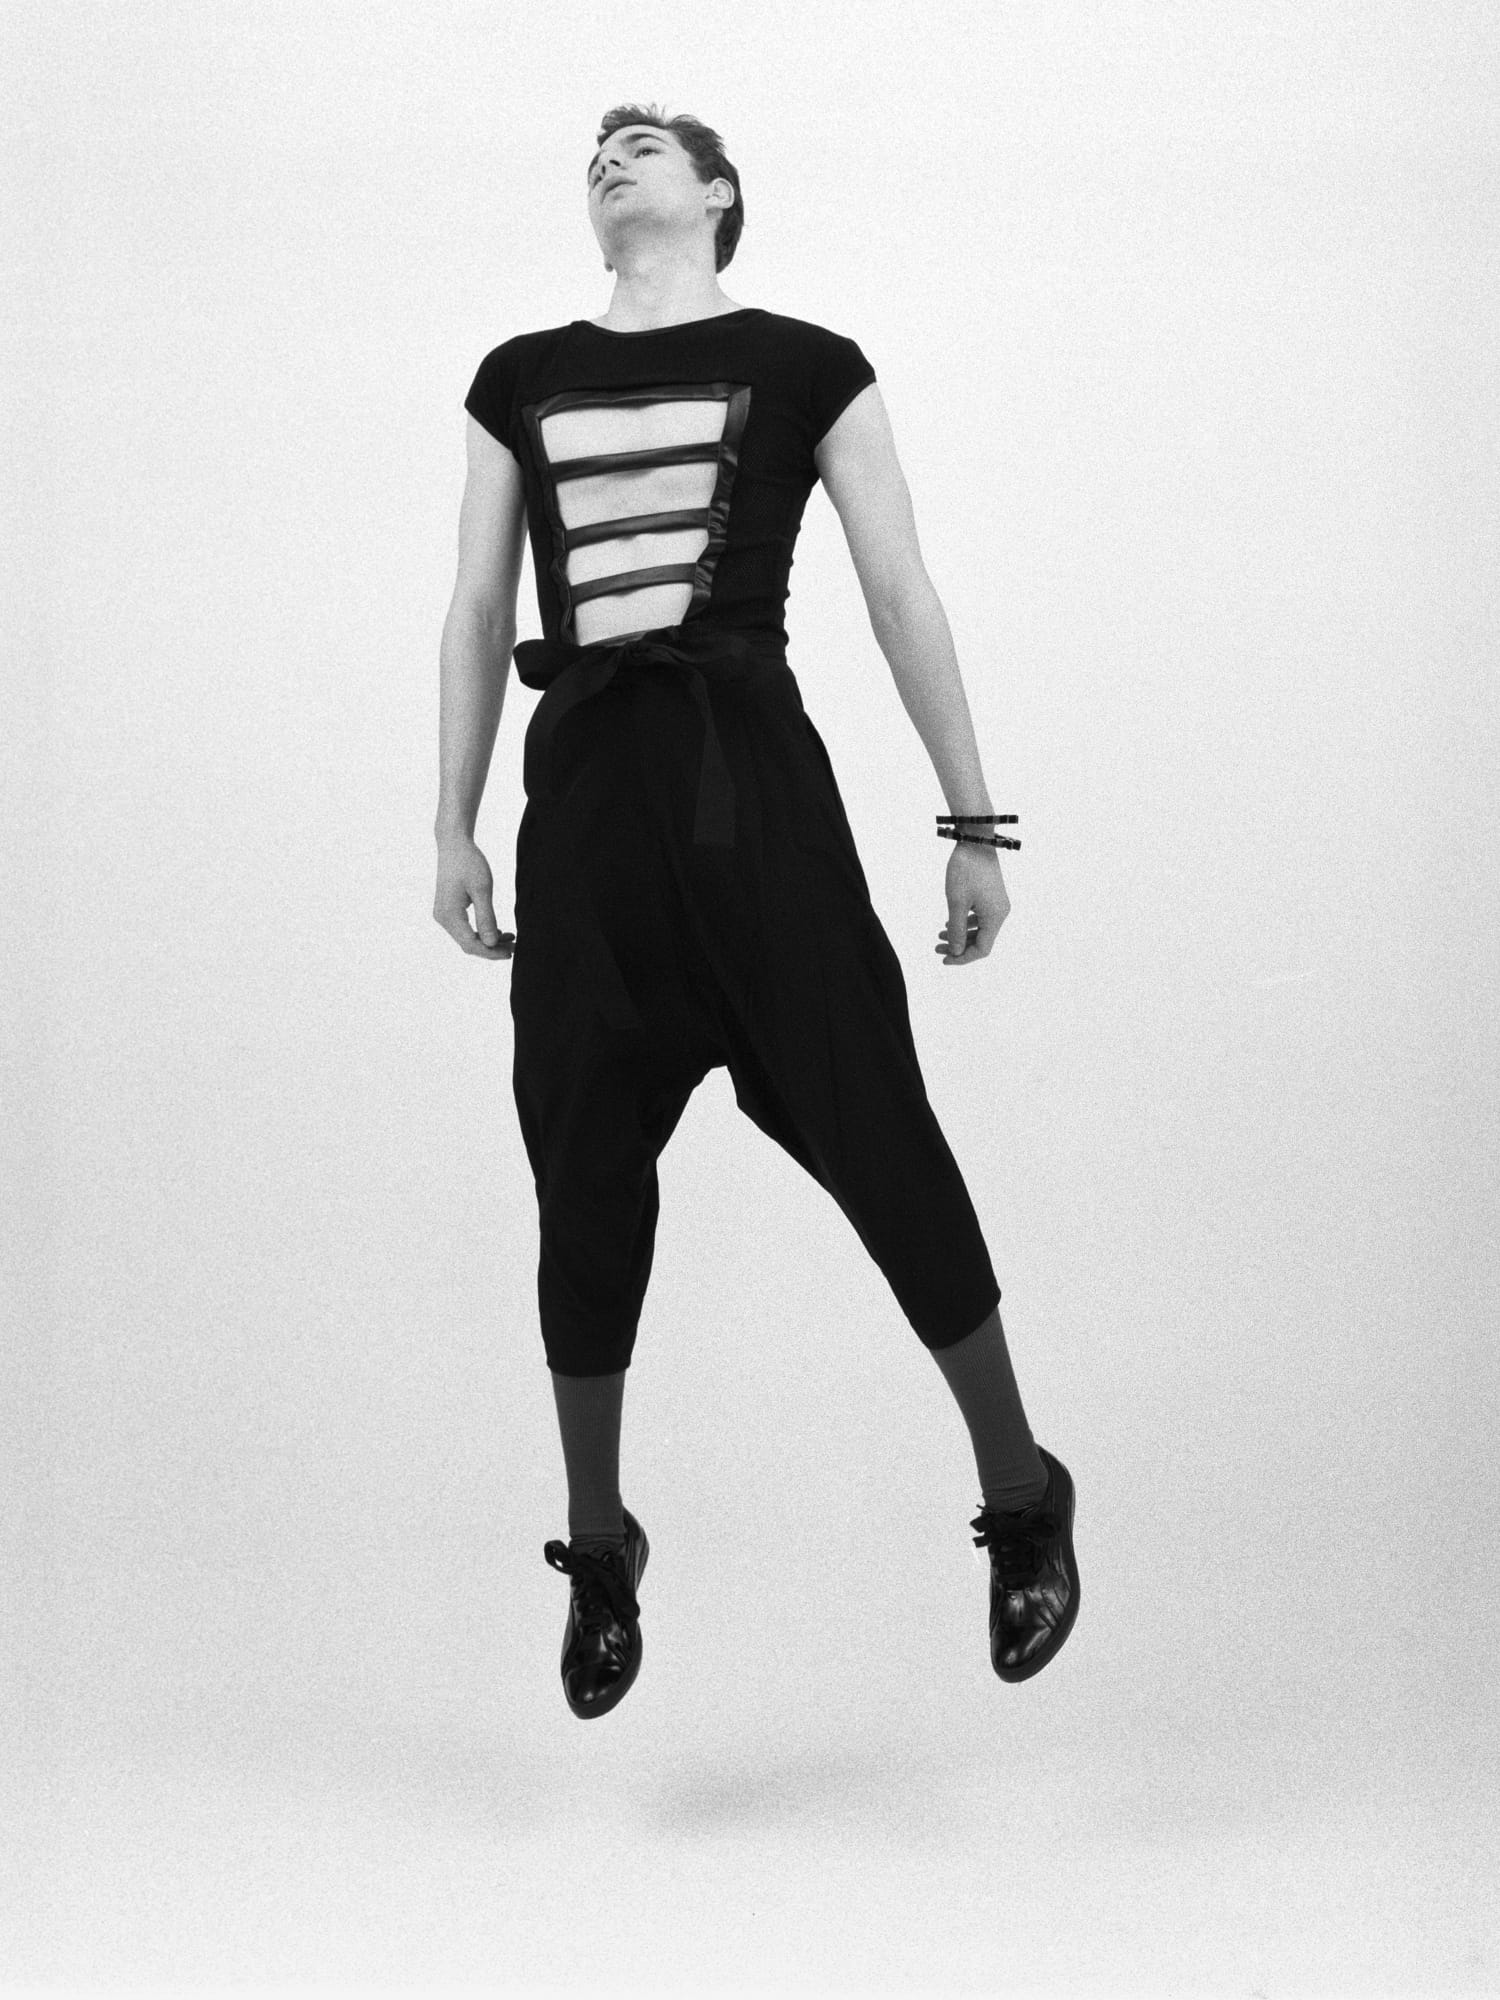 Man jumping in the air, wearing an all black outfit with horizontal cutouts across the chest